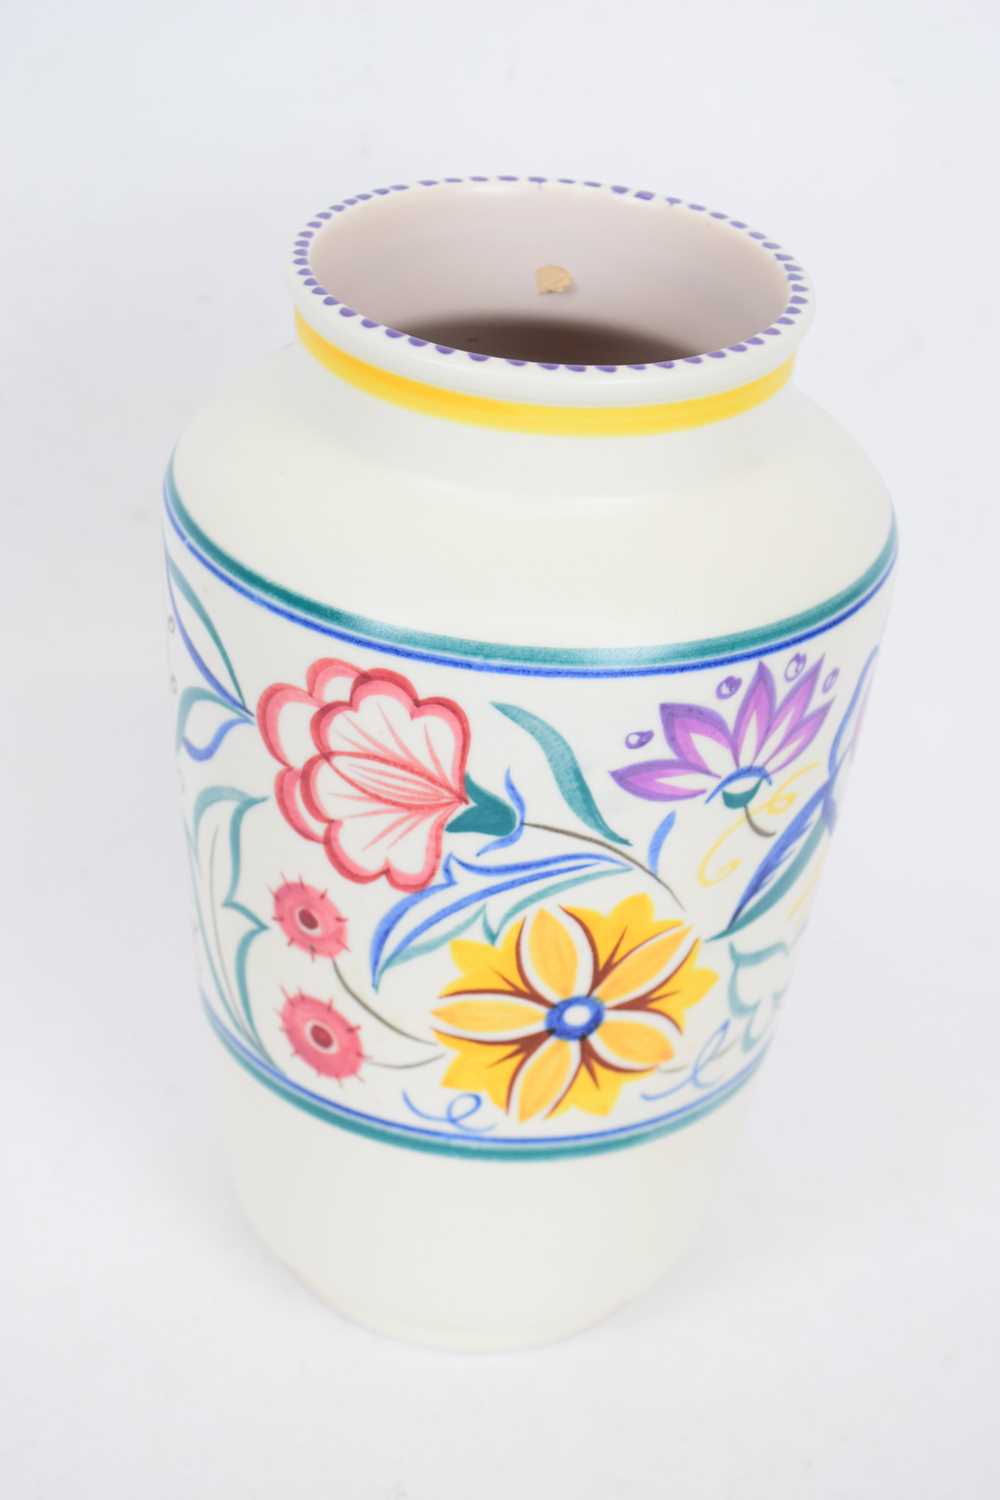 Lot 92 - Poole pottery vase with typical floral design